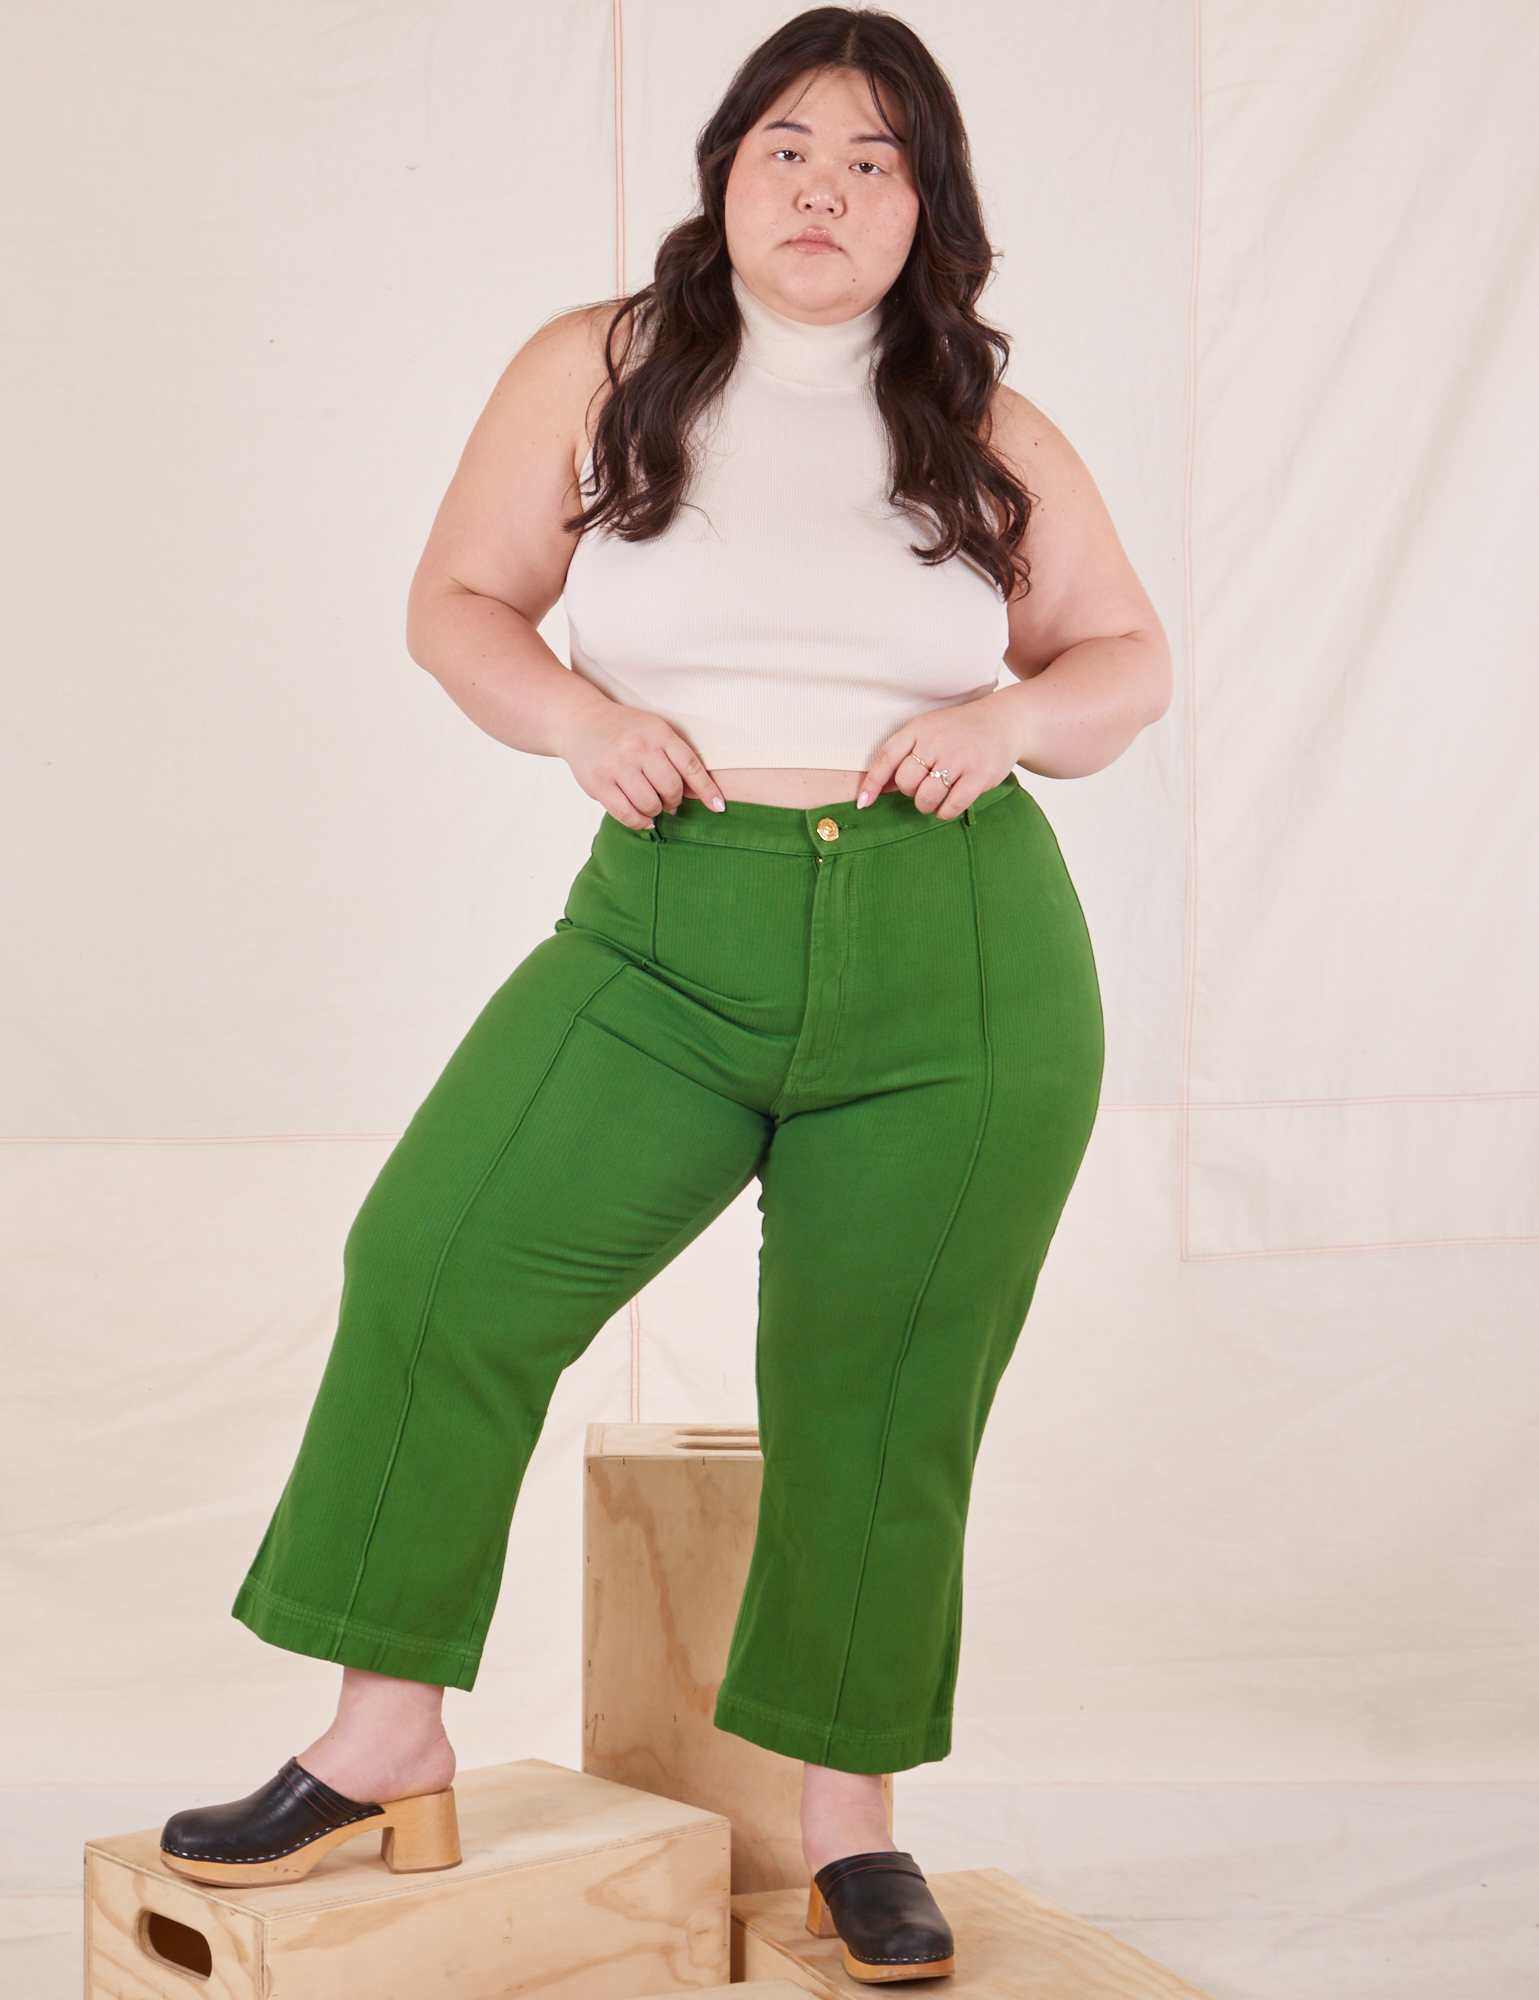 Ashley is 5&#39;7&quot; and wearing 1XL Petite Heritage Westerns in Lawn Green paired with Sleeveless Turtleneck in vintage tee off-white